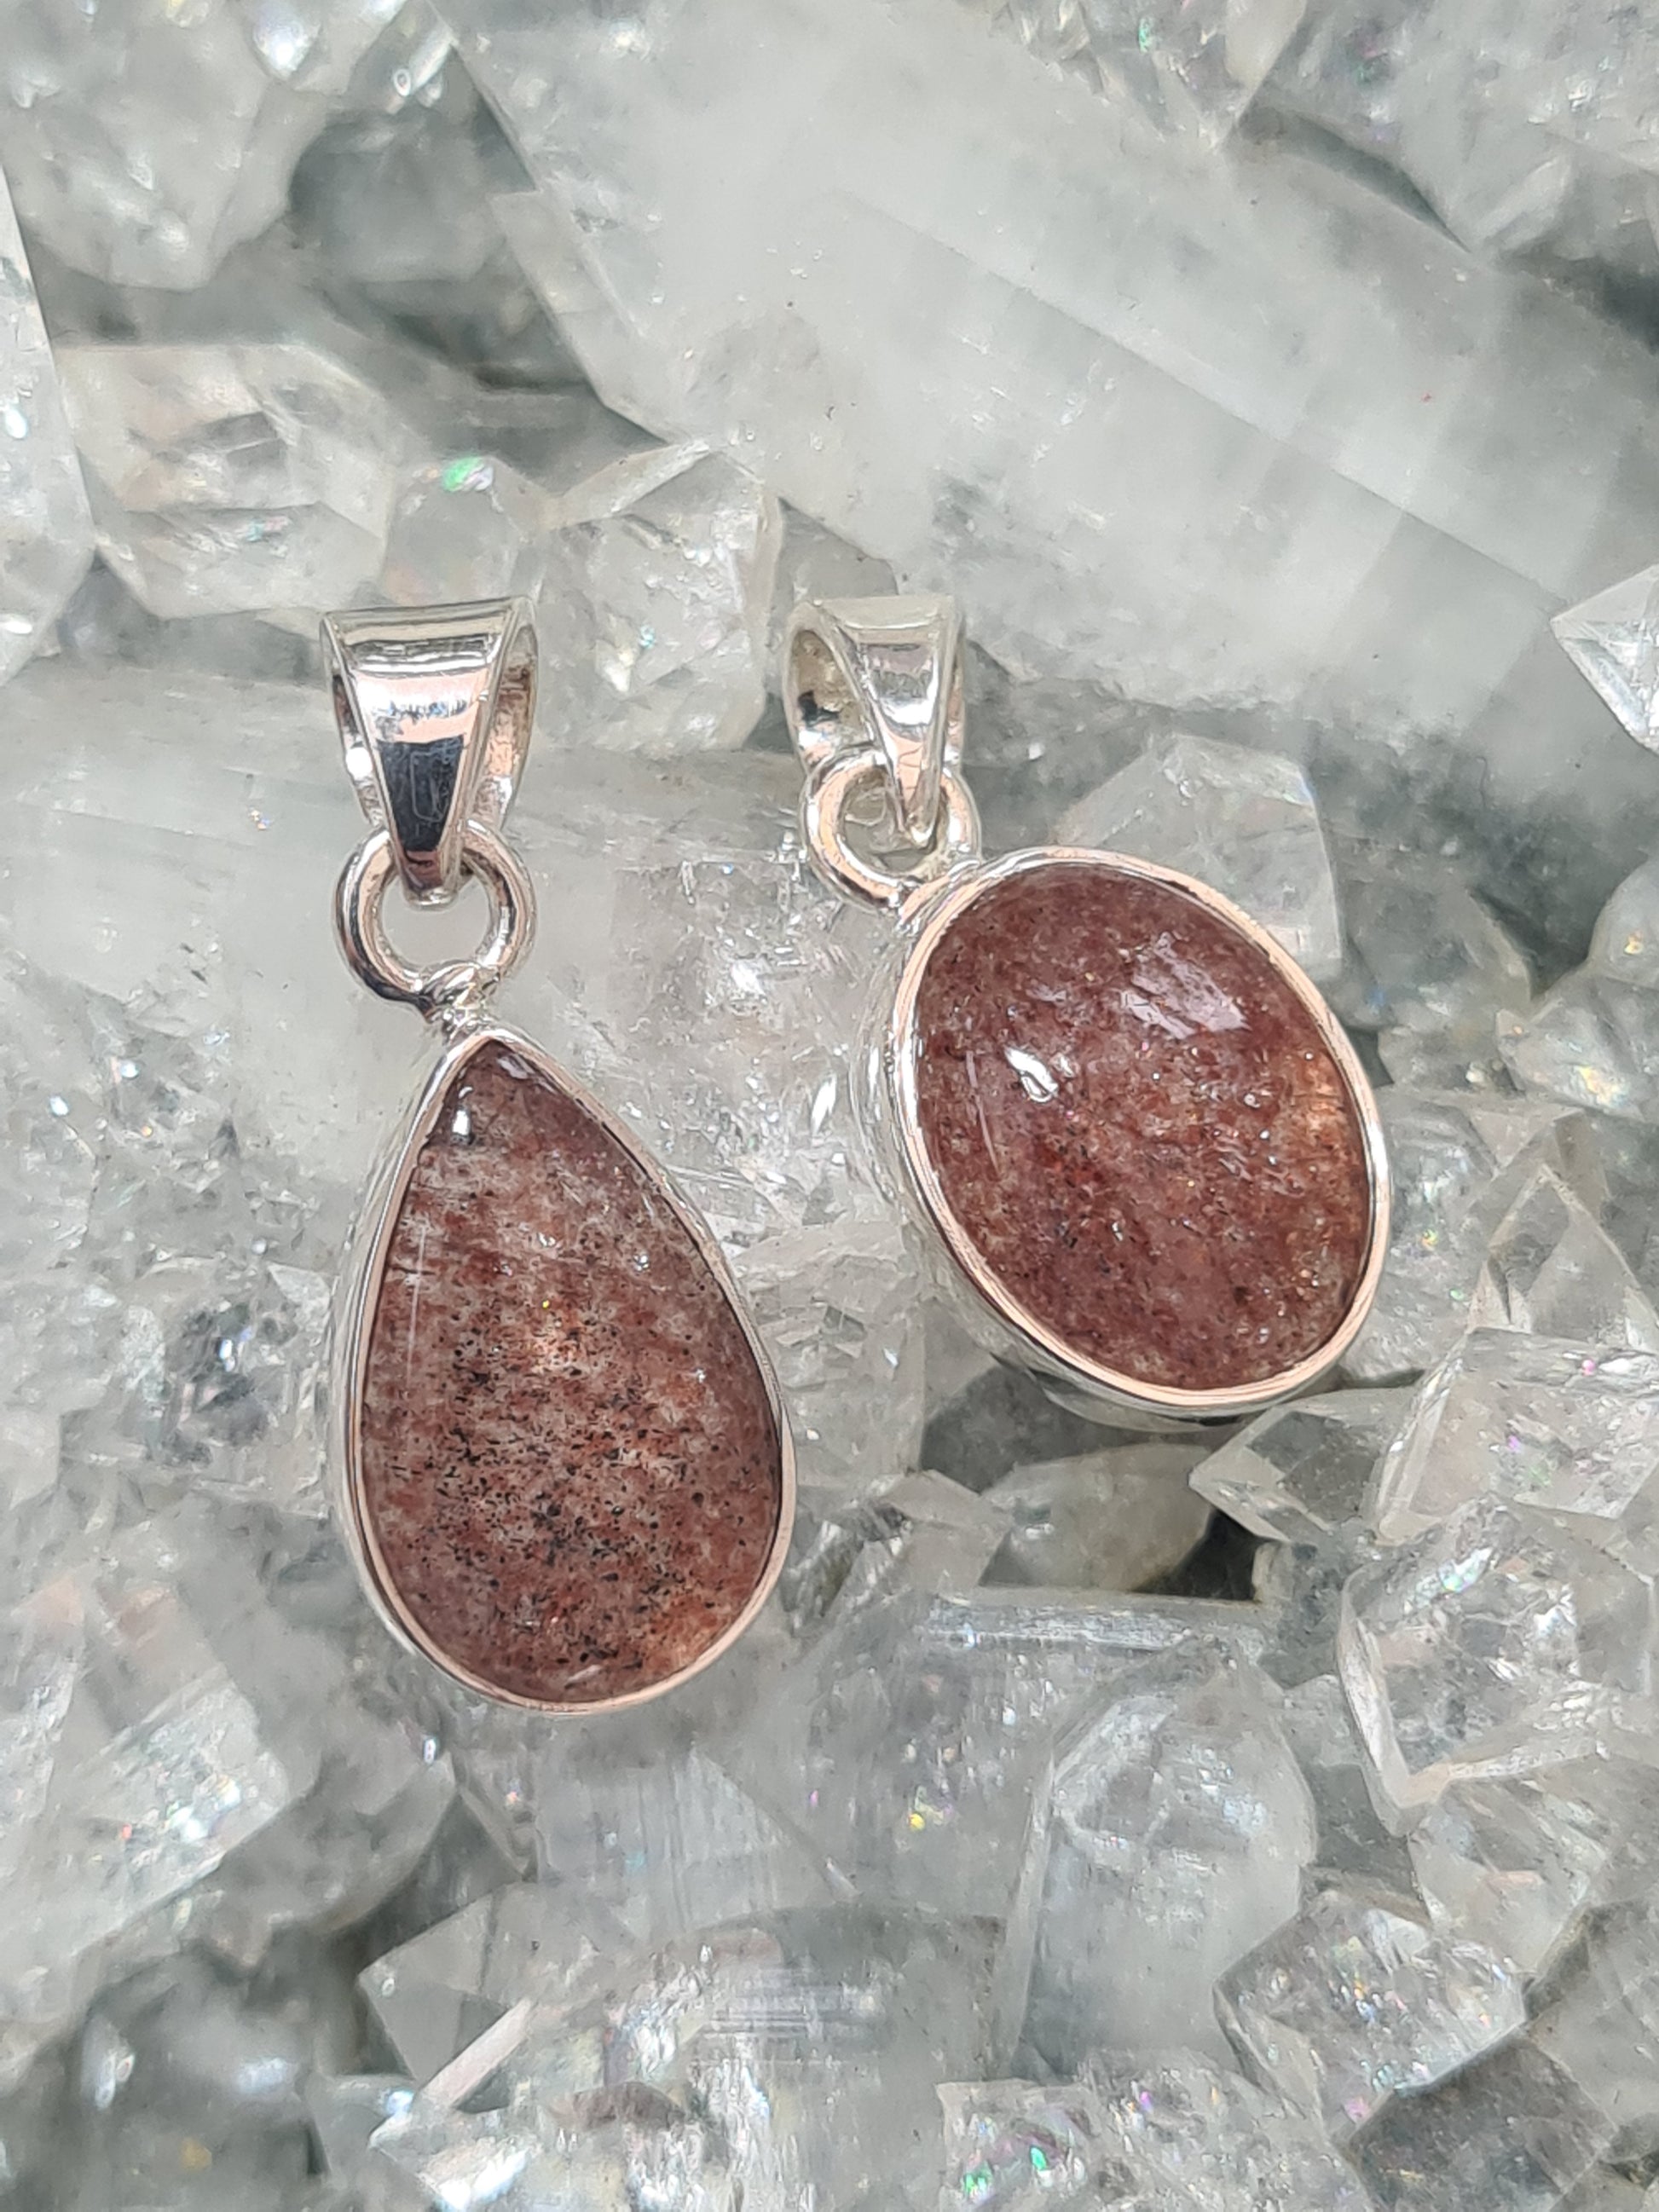 Two Strawberry Quartz Set Pendants in Sterling Silver. 1 pear shaped and 1 oval shaped.